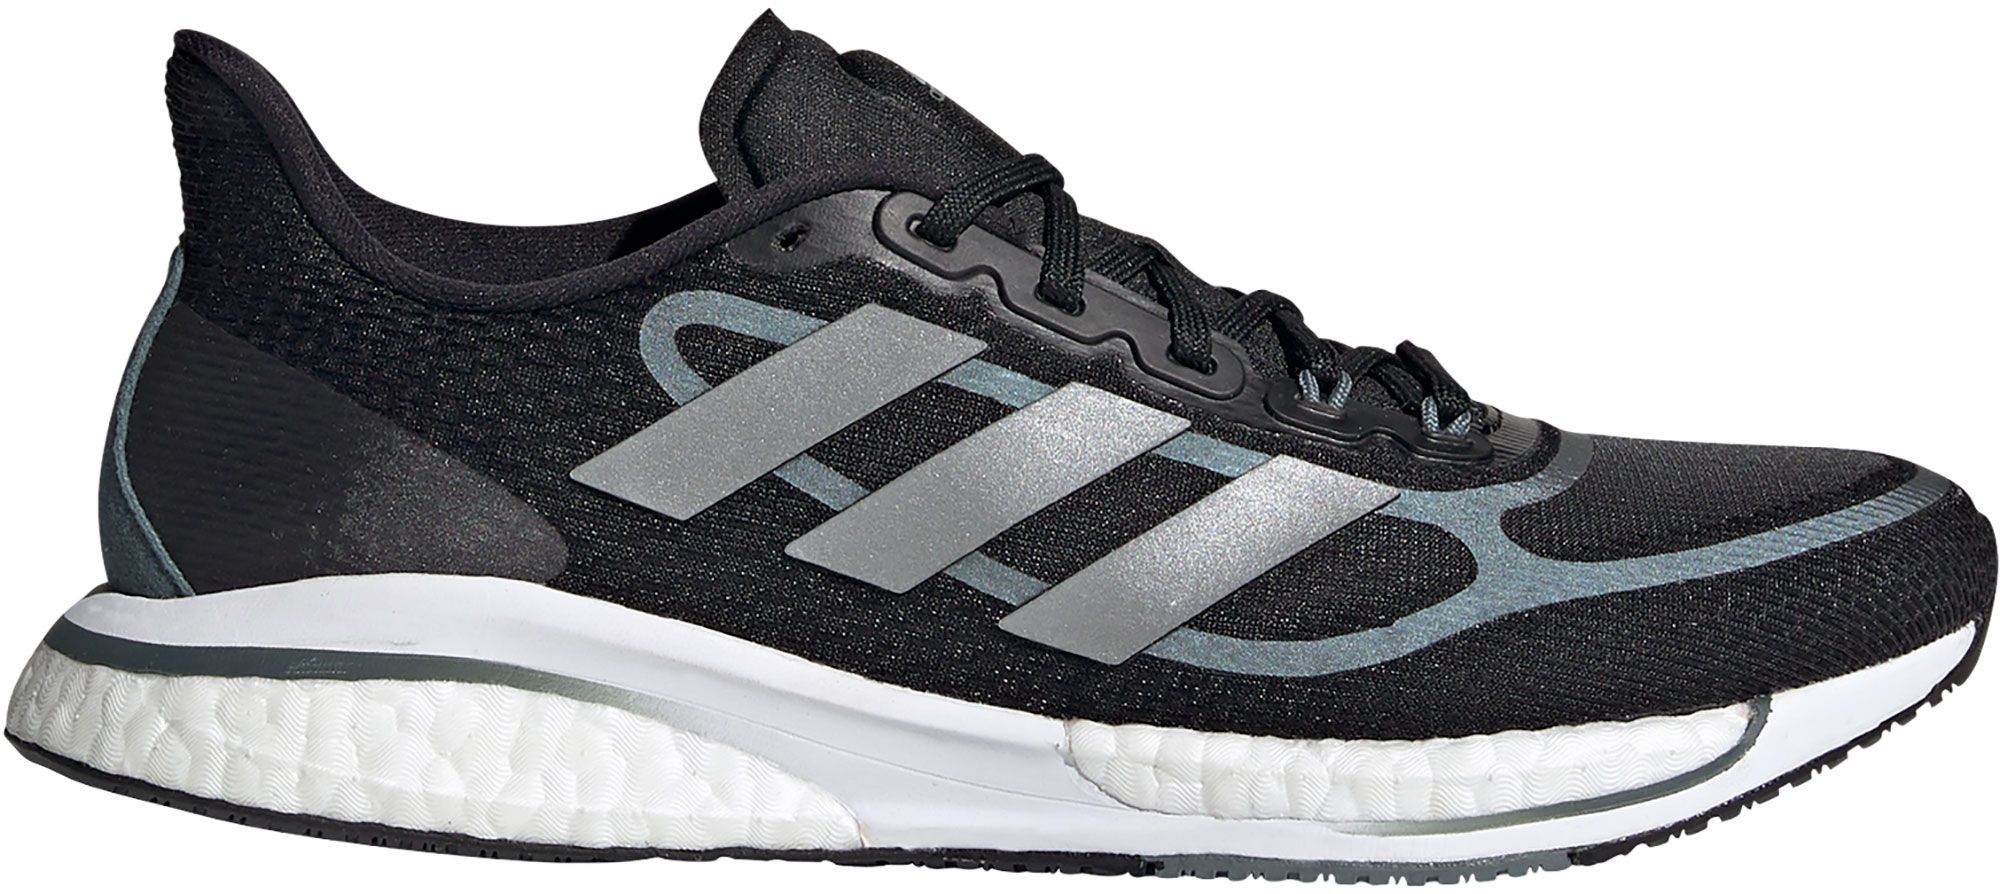 adidas running shoes sale mens